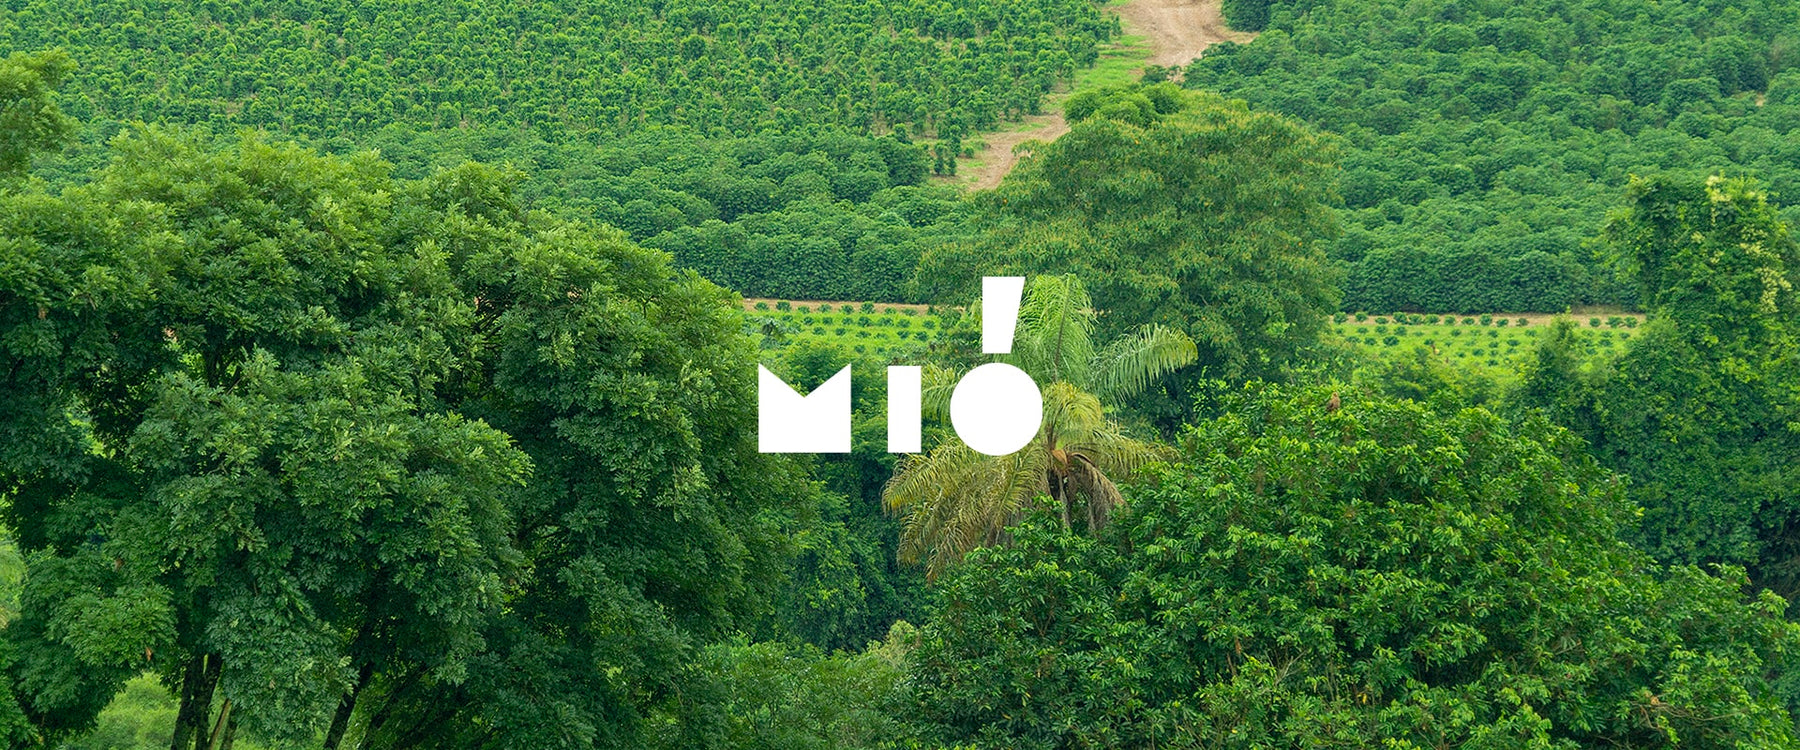 Traceability in Coffee: Interview with Ana Luiza Pellicer from Mió